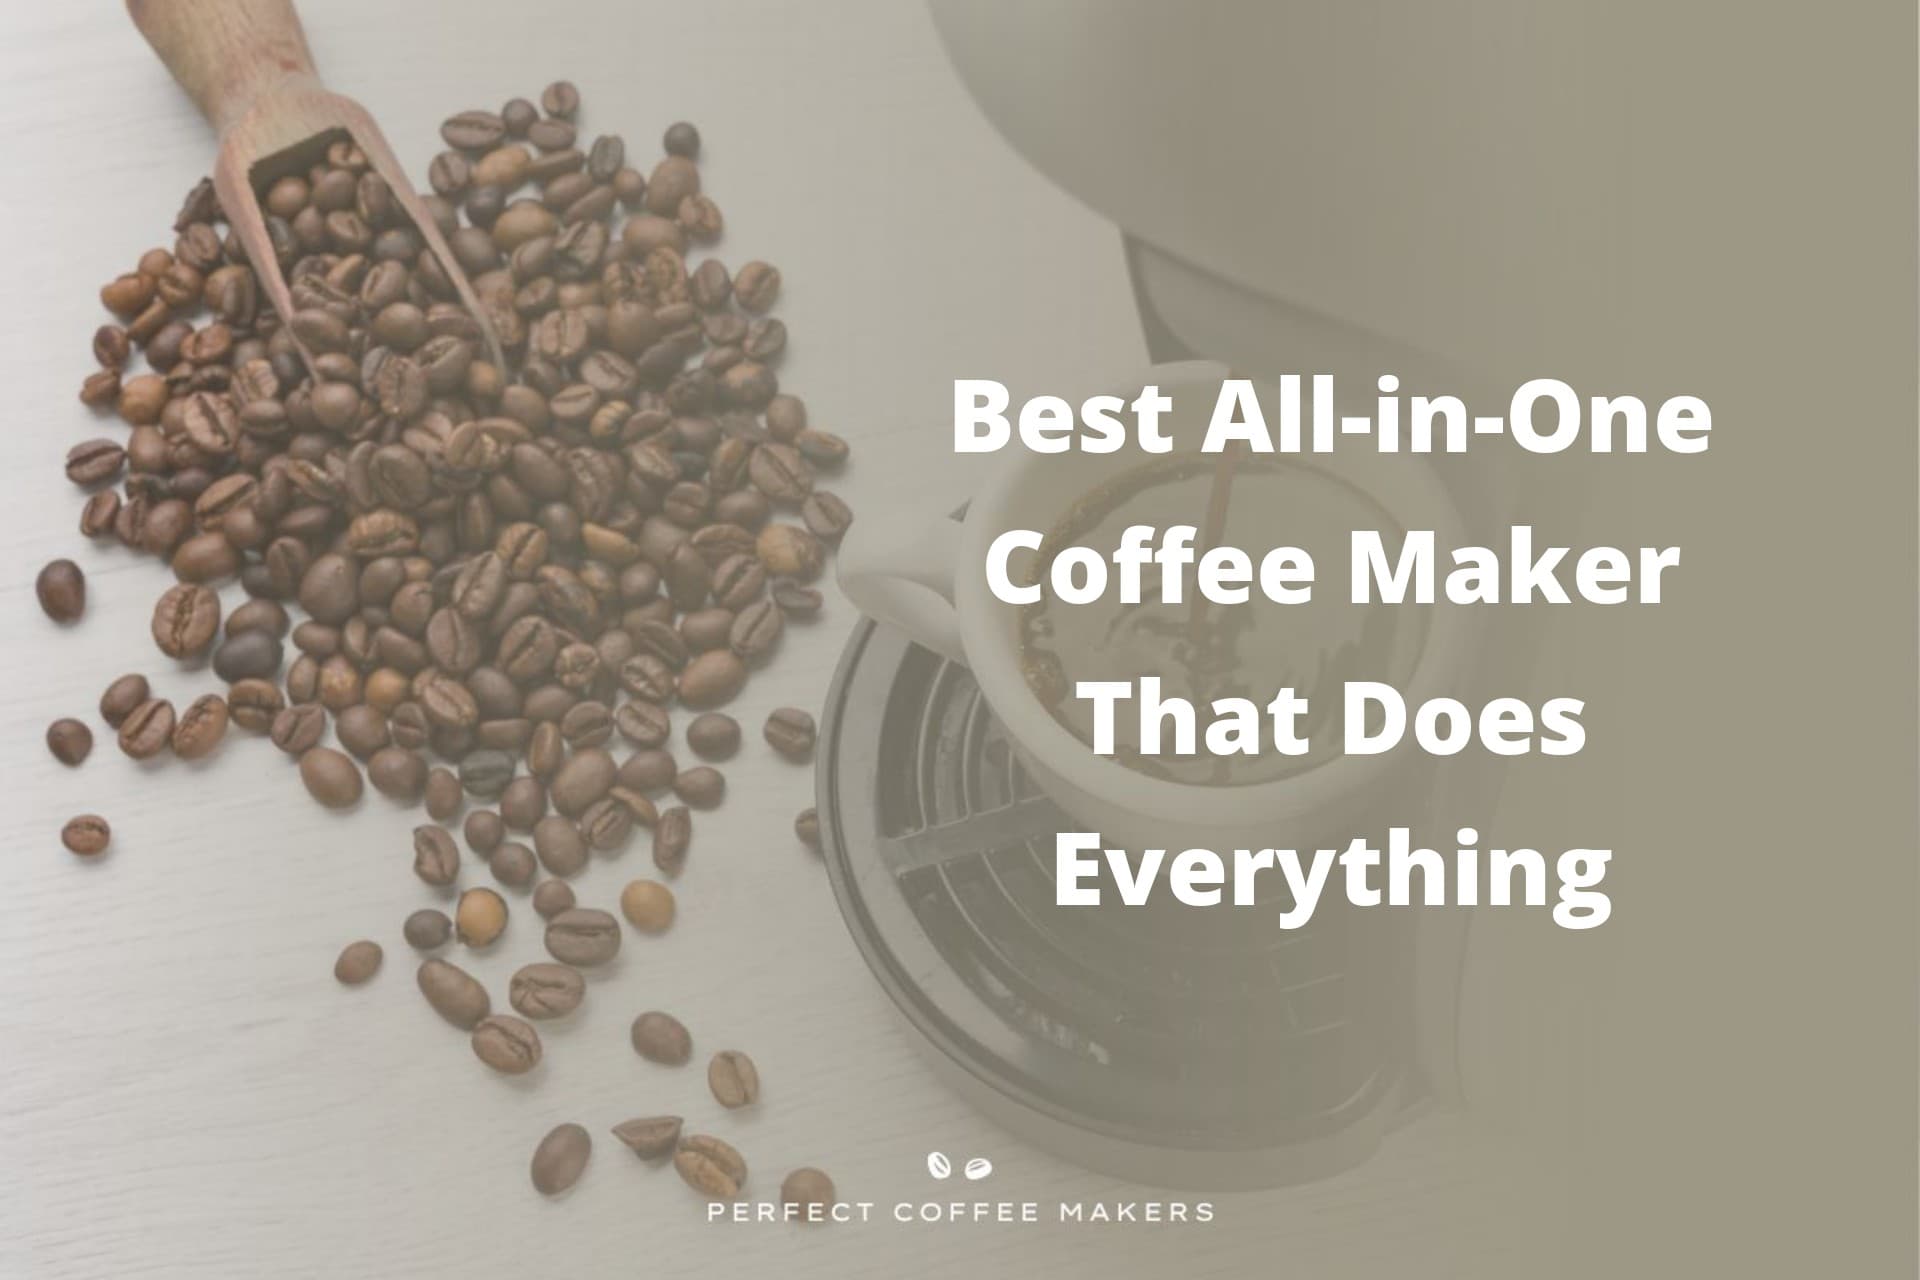 Best All-in-One Coffee Maker That Does Everything